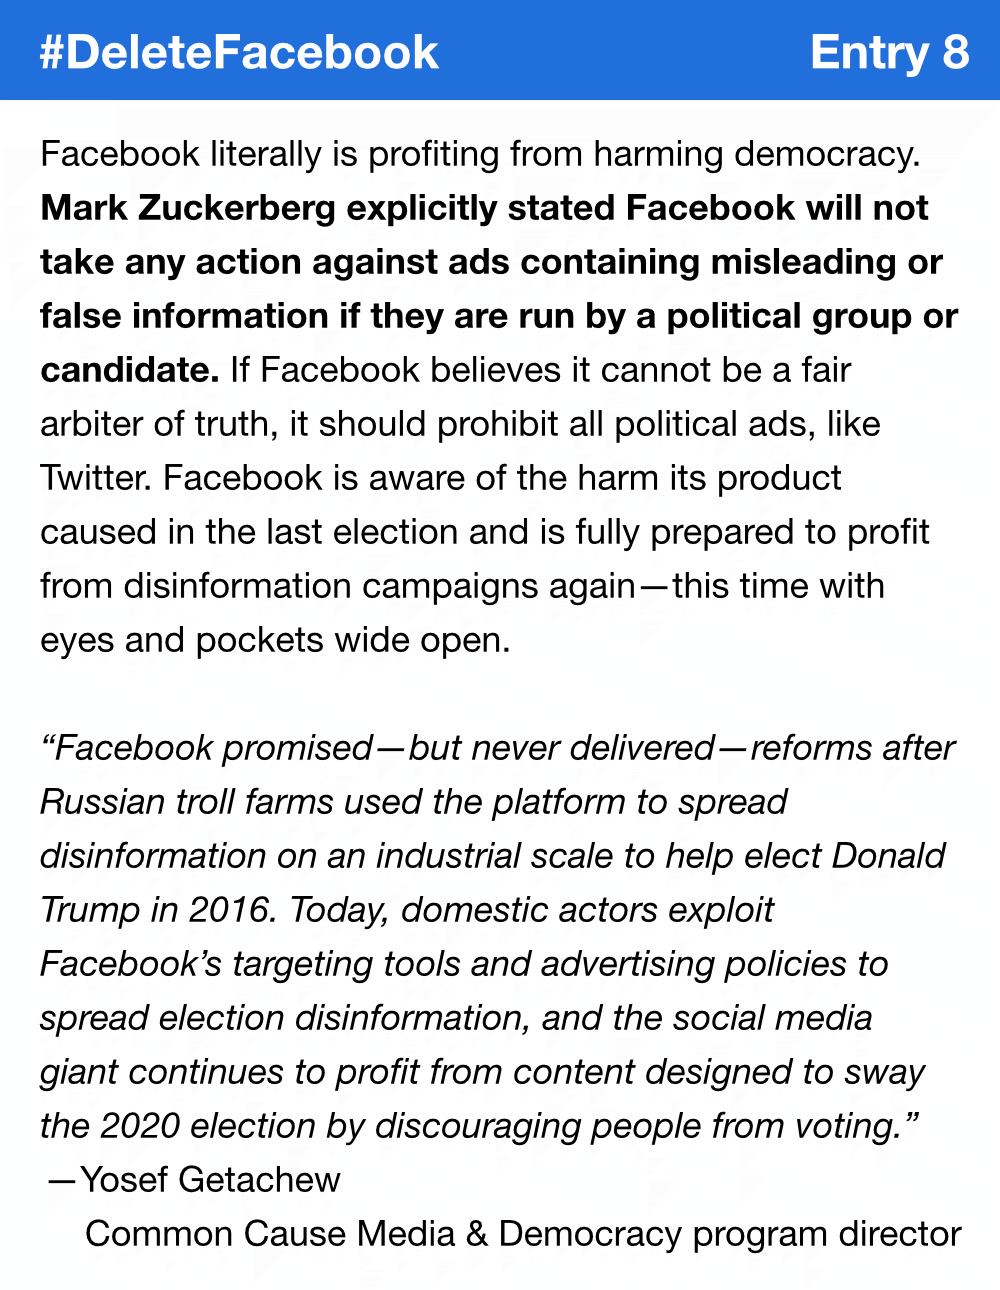 Facebook literally is profiting from harming democracy. Mark Zuckerberg explicitly stated Facebook will not take any action against ads containing misleading or false information if they are run by a political group or candidate. If Facebook believes it cannot be a fair arbiter of truth, it should prohibit all political ads, like Twitter. Facebook is aware of the harm its product caused in the last election and is fully prepared to profit from disinformation campaigns again—this time with eyes and pockets wide open. “Facebook promised—but never delivered—reforms after Russian troll farms used the platform to spread disinformation on an industrial scale to help elect Donald Trump in 2016. Today, domestic actors exploit Facebook’s targeting tools and advertising policies to spread election disinformation, and the social media giant continues to profit from content designed to sway the 2020 election by discouraging people from voting.” Yosef Getachew, Common Cause Media & Democracy program director